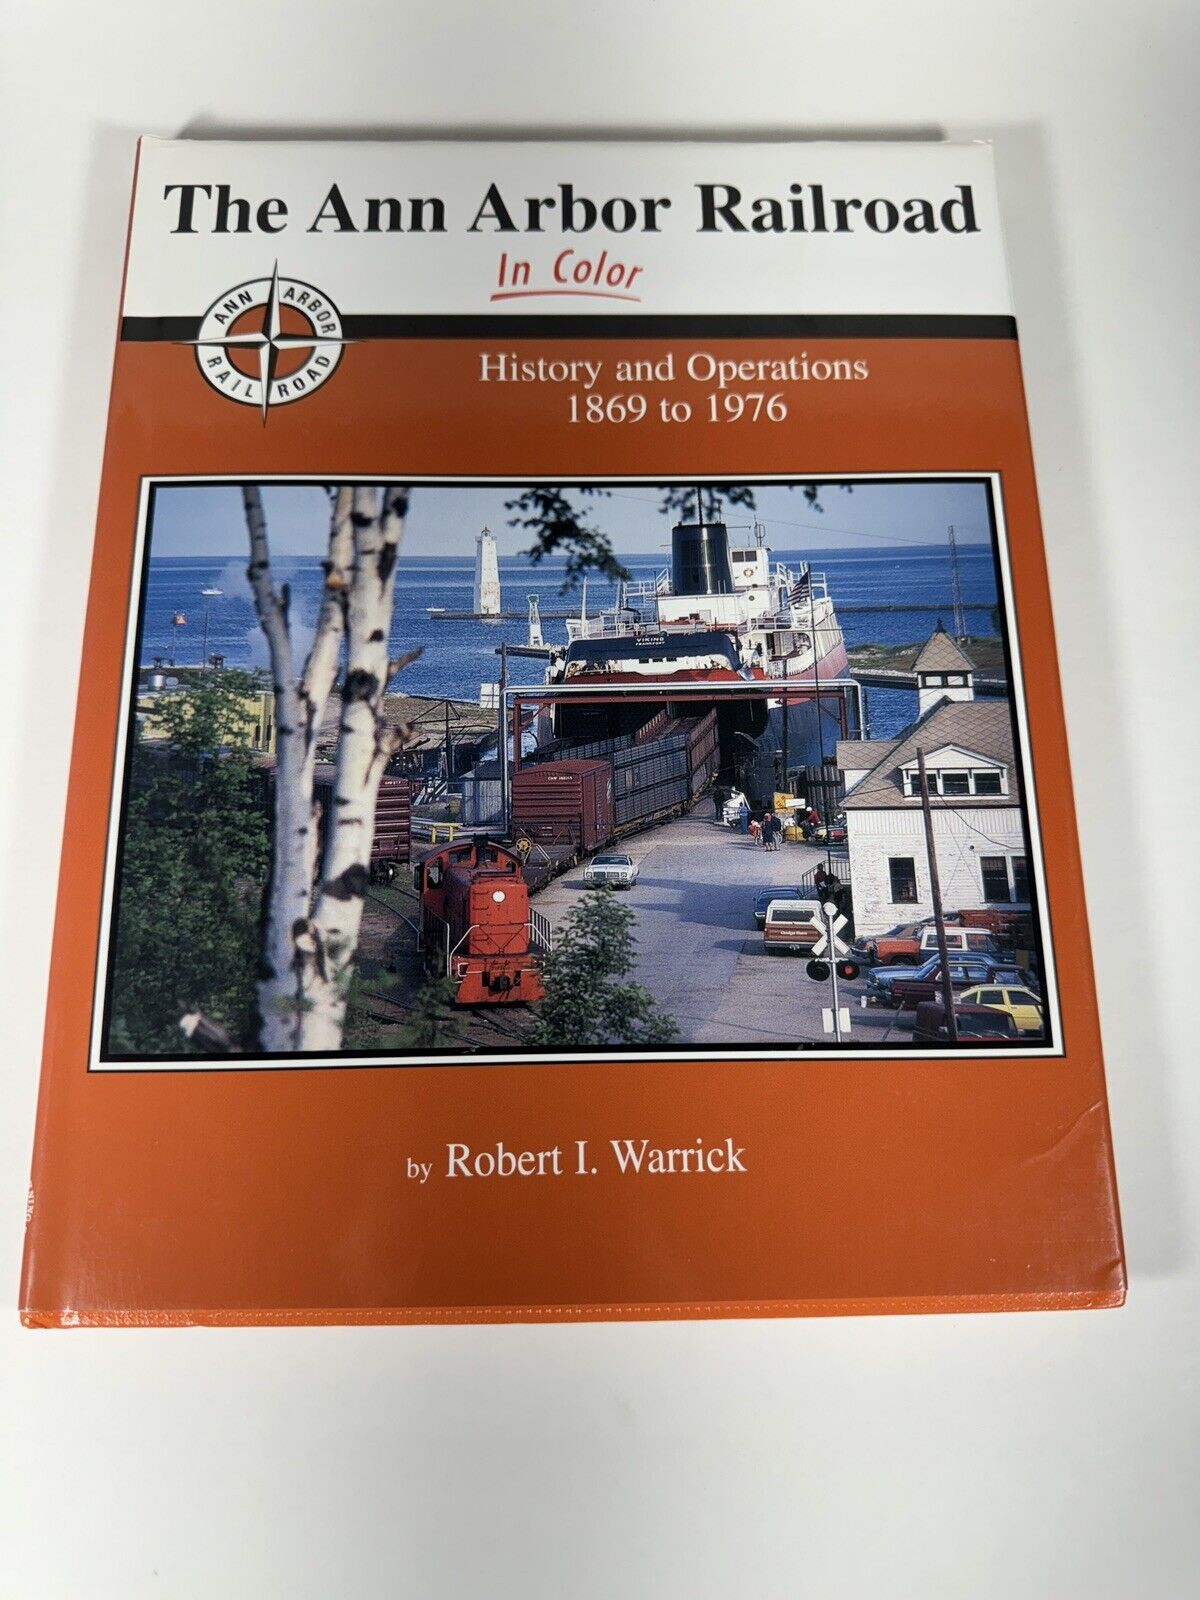 Morning Sun The Ann Arbor Railroad In Color by Robert I Warrick ©2008 HC Book